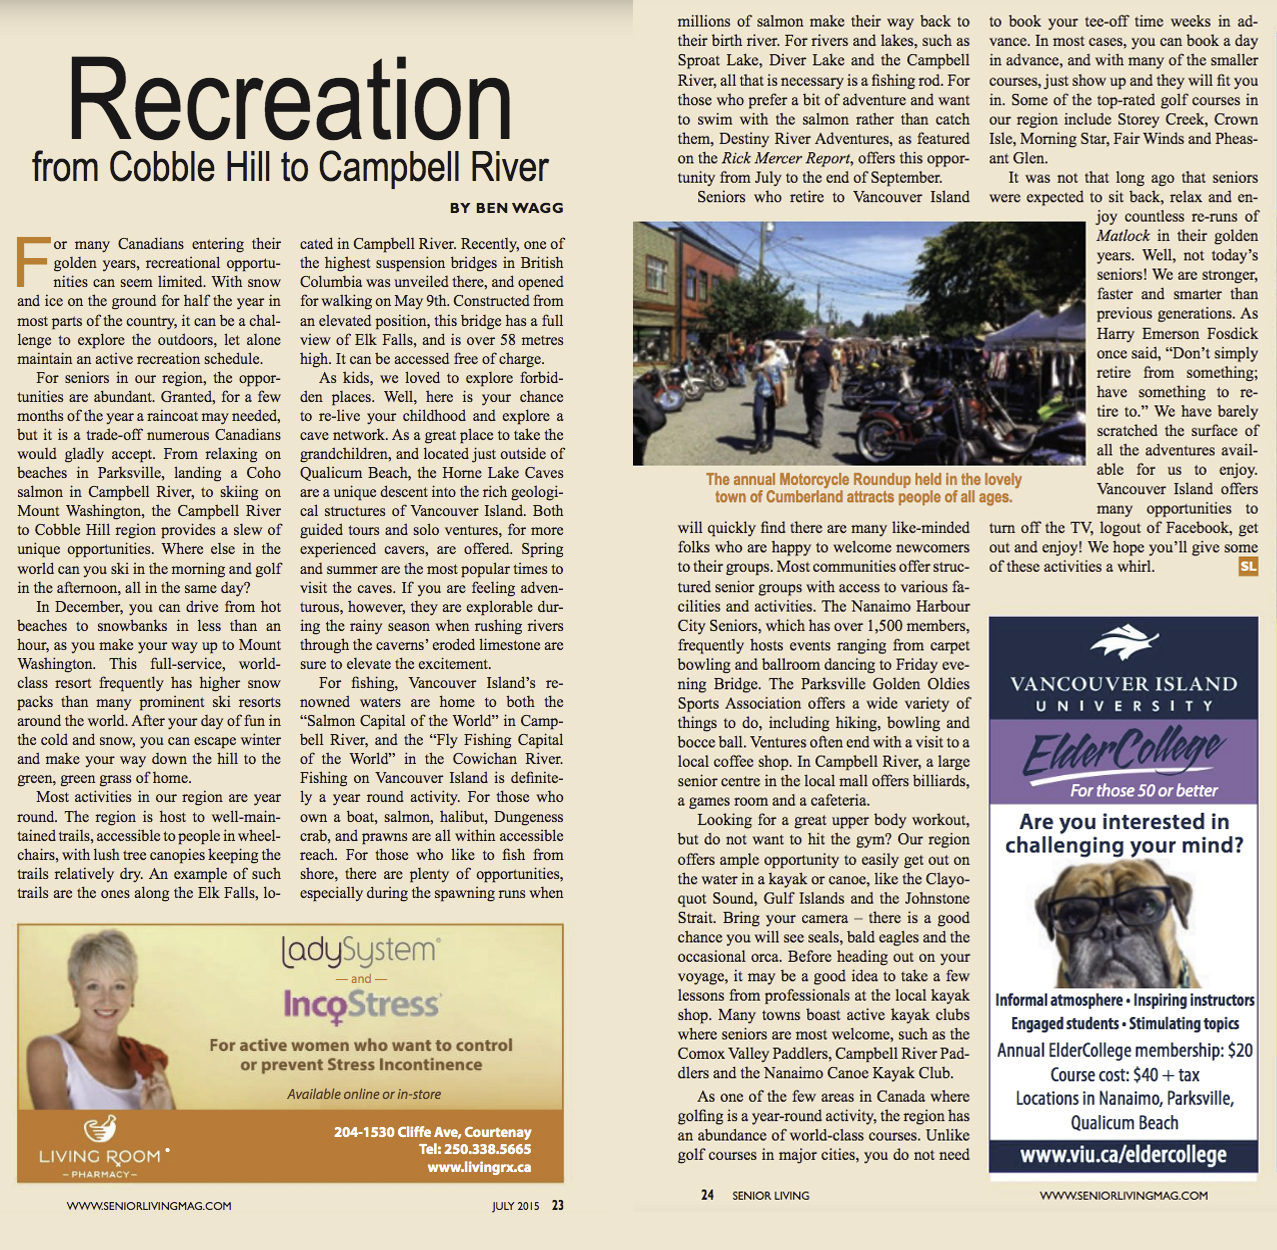 Article about senior living in campbell river